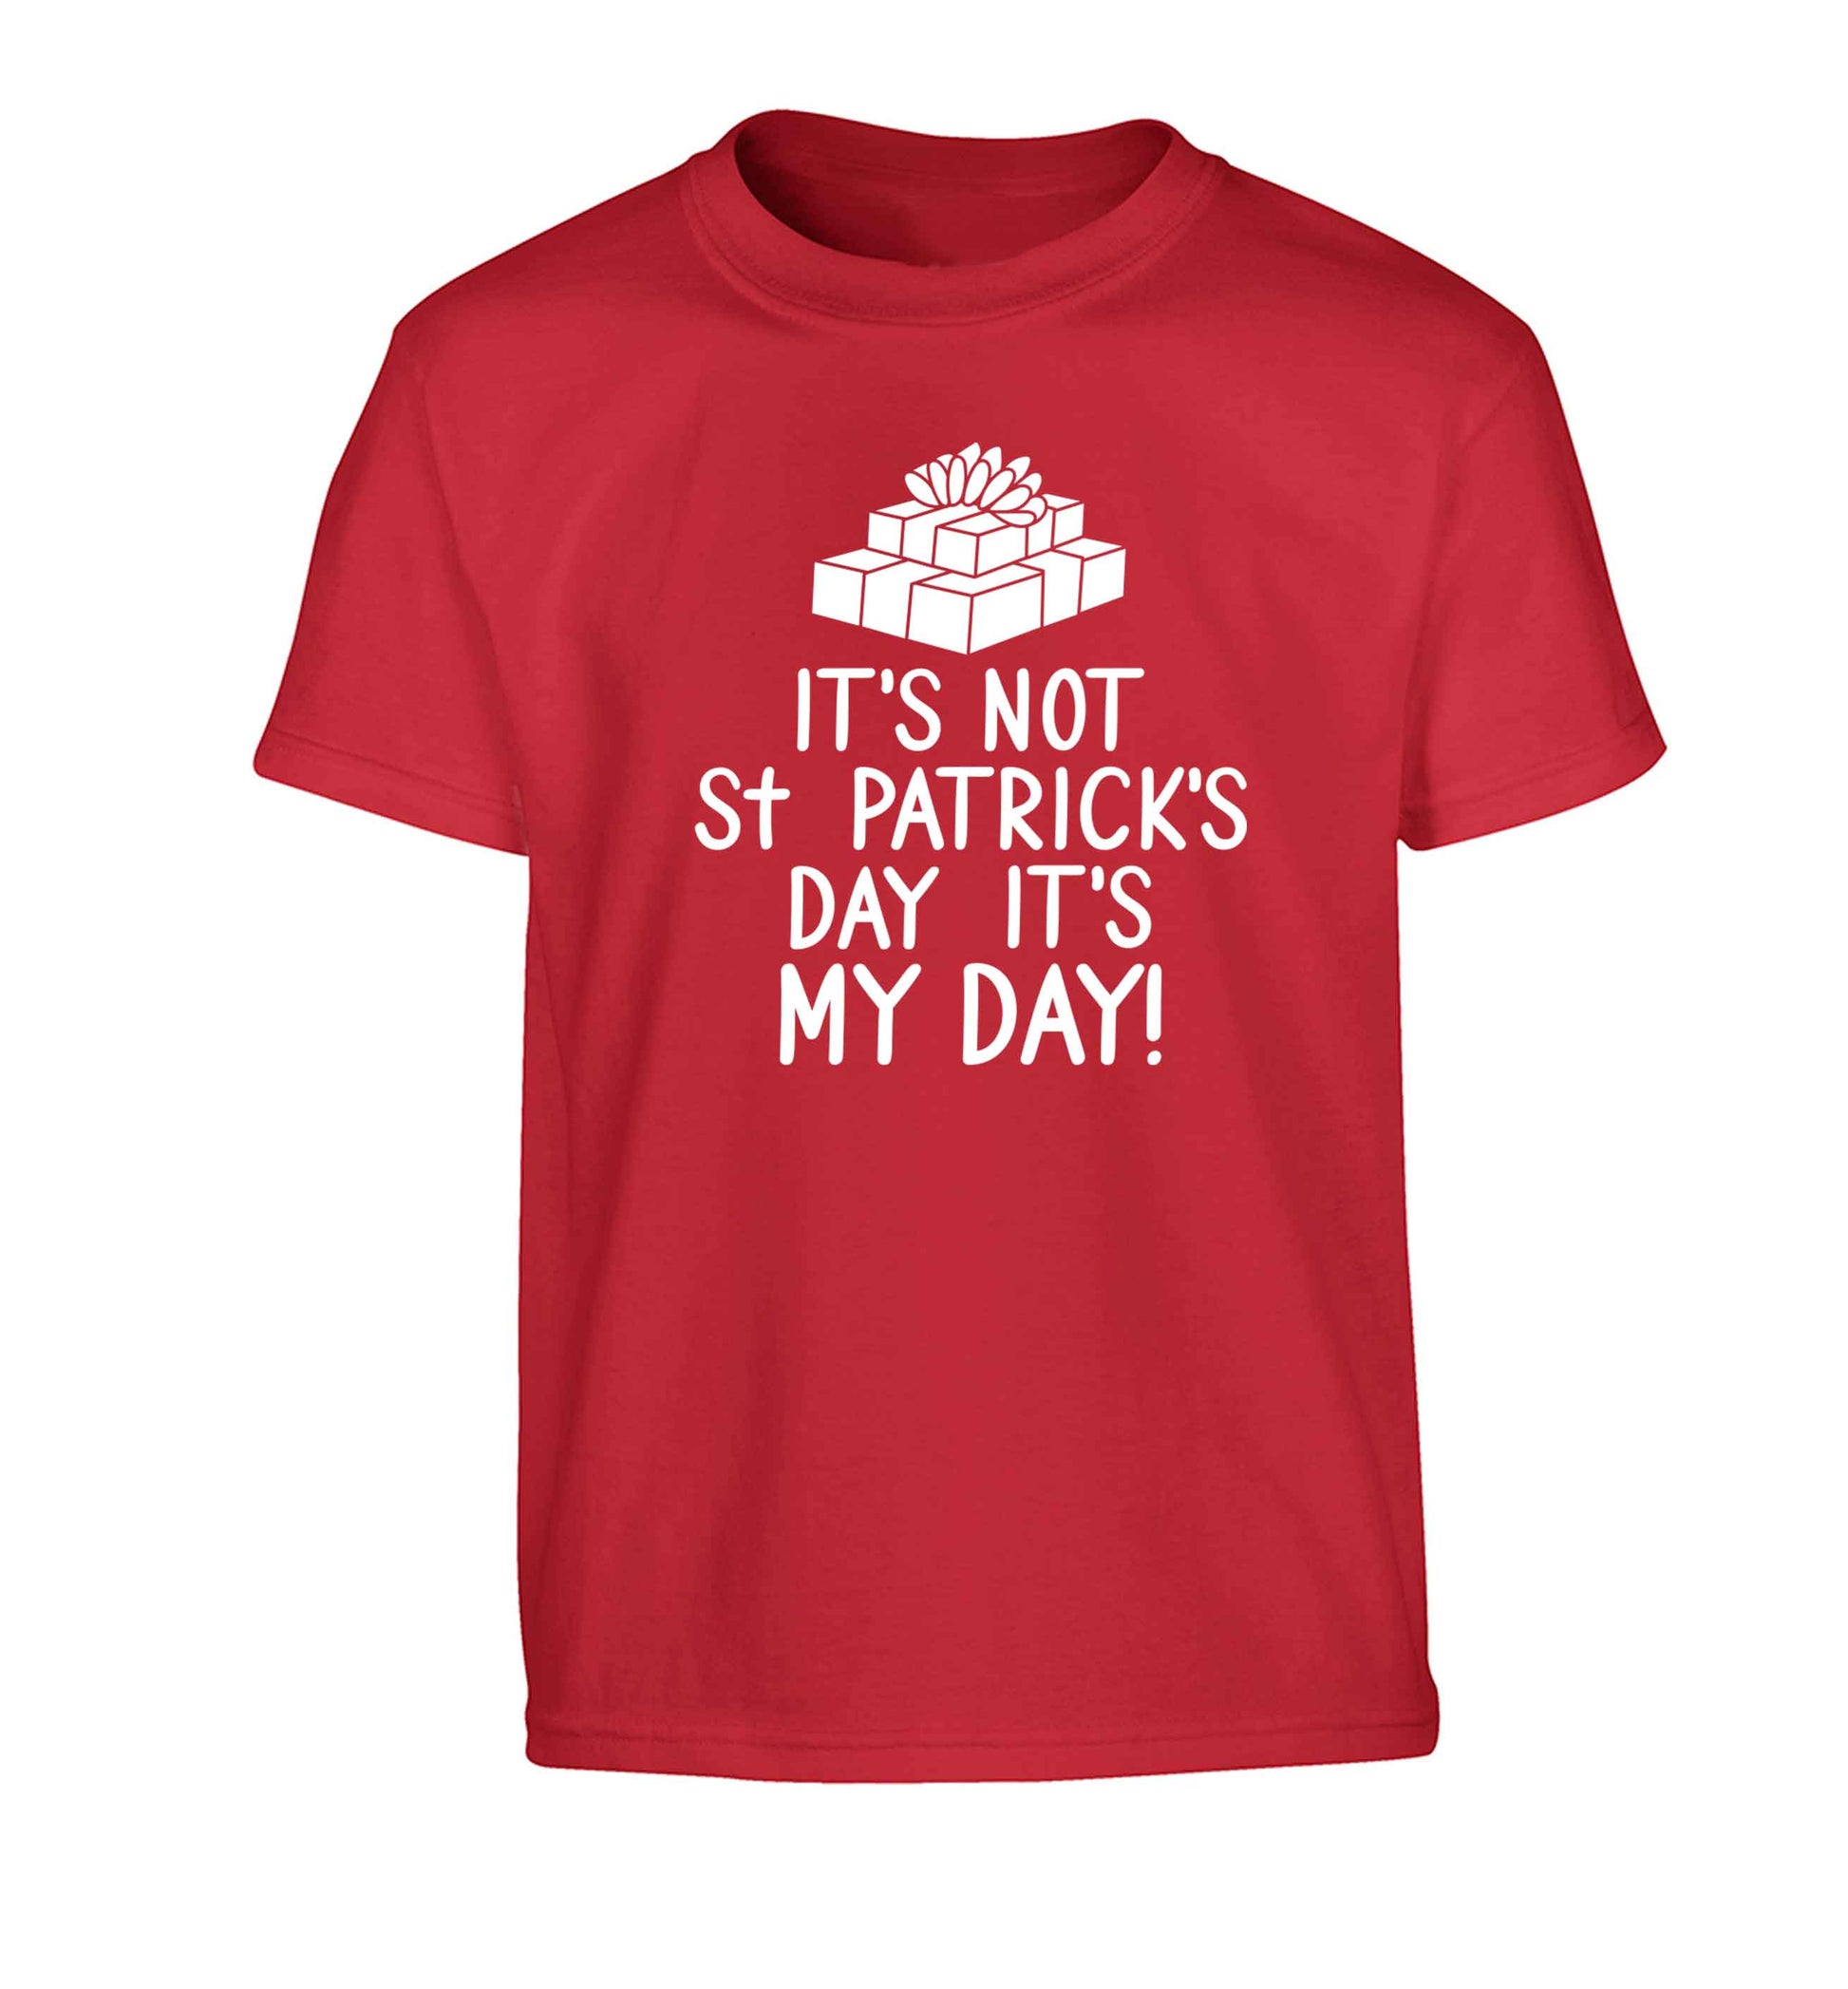 Funny gifts for your mum on mother's dayor her birthday! It's not St Patricks day it's my day Children's red Tshirt 12-13 Years